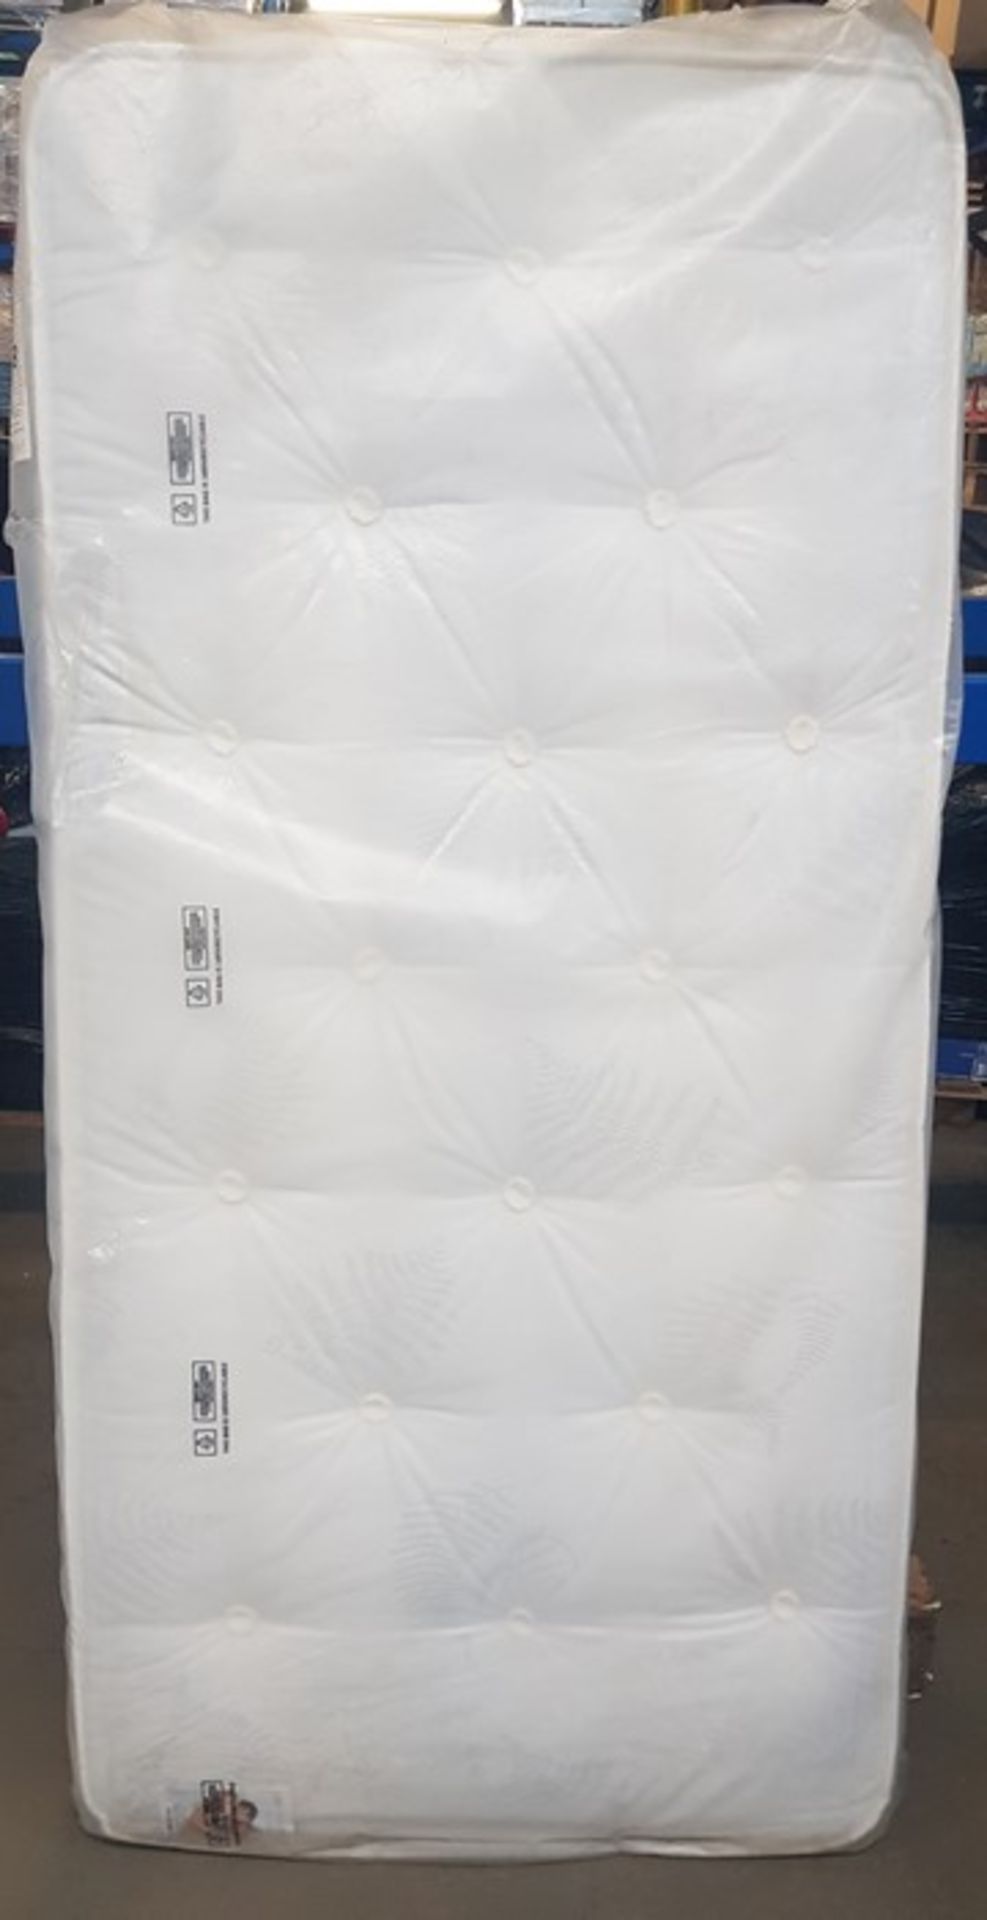 1 BAGGED 90CM SINGLE POCKET SPRUNG MATTRESS / RRP £129.99 (PUBLIC VIEWING AVAILABLE)